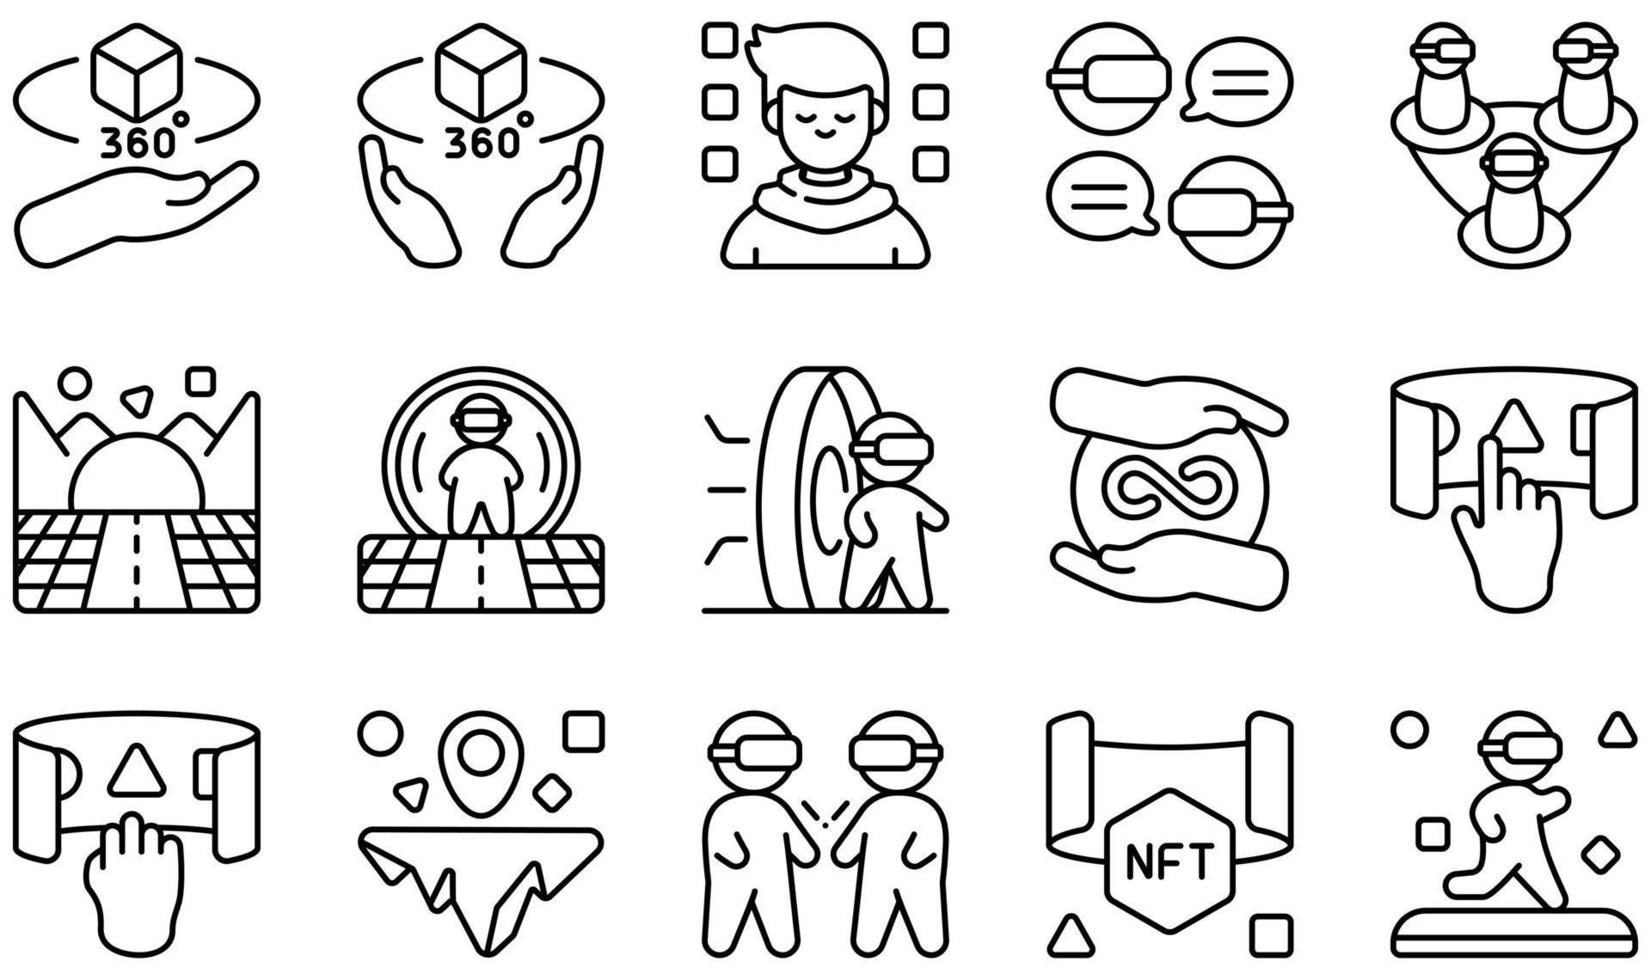 Set of Vector Icons Related to Metaverse. Contains such Icons as Communityd, Avatar, Community, Cyberspace, Infinity, Interaction and more.